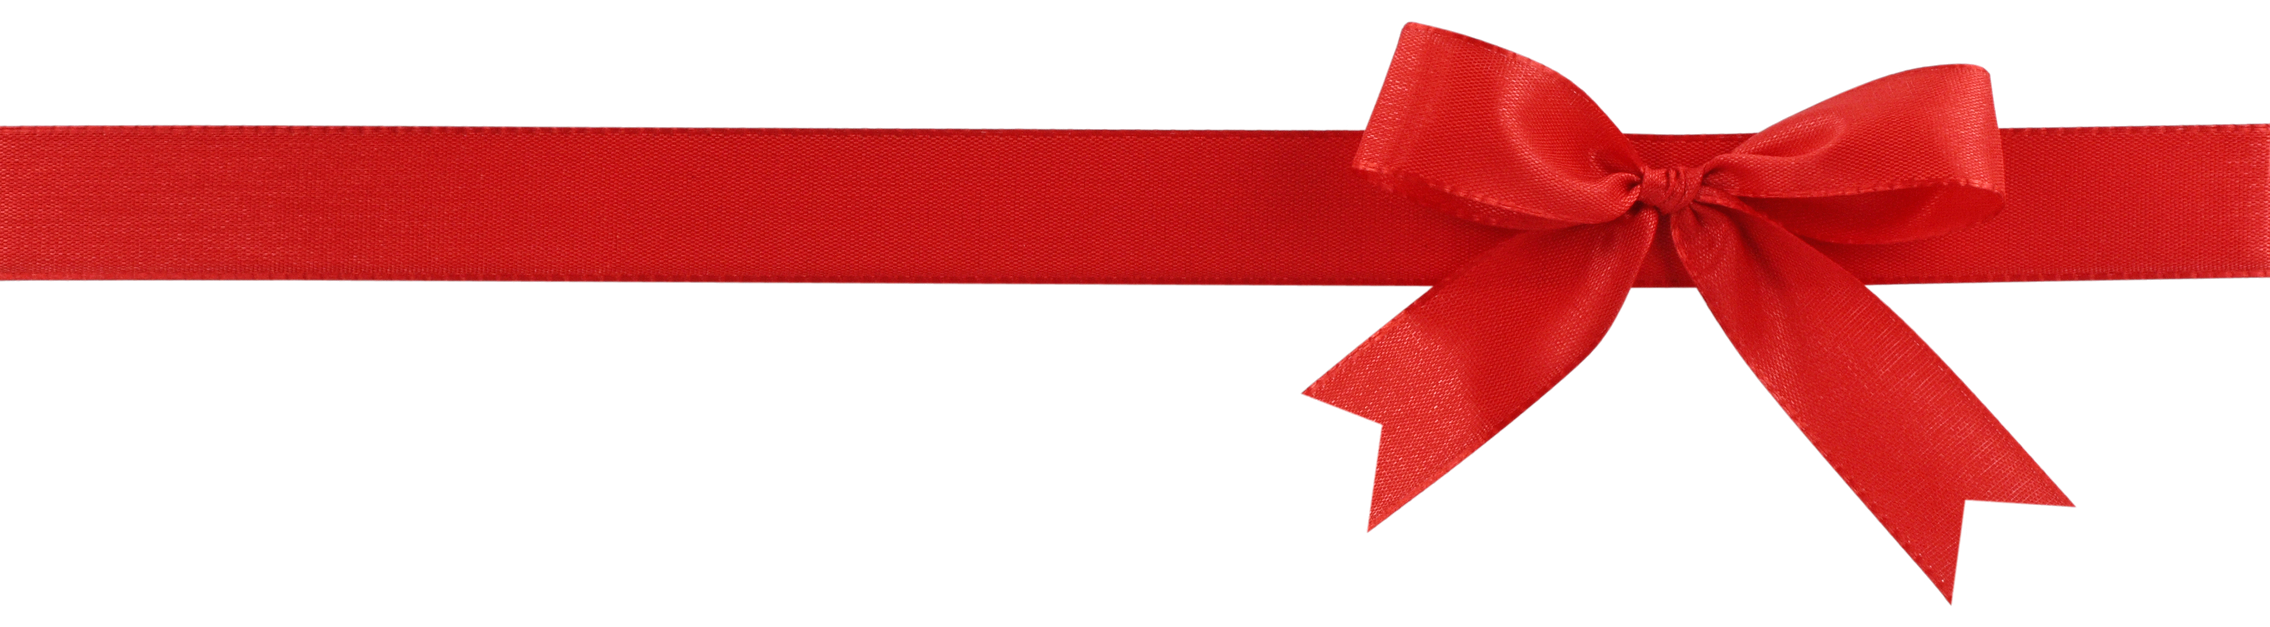 Red Ribbon Bow PNG Transparent Images Free Download